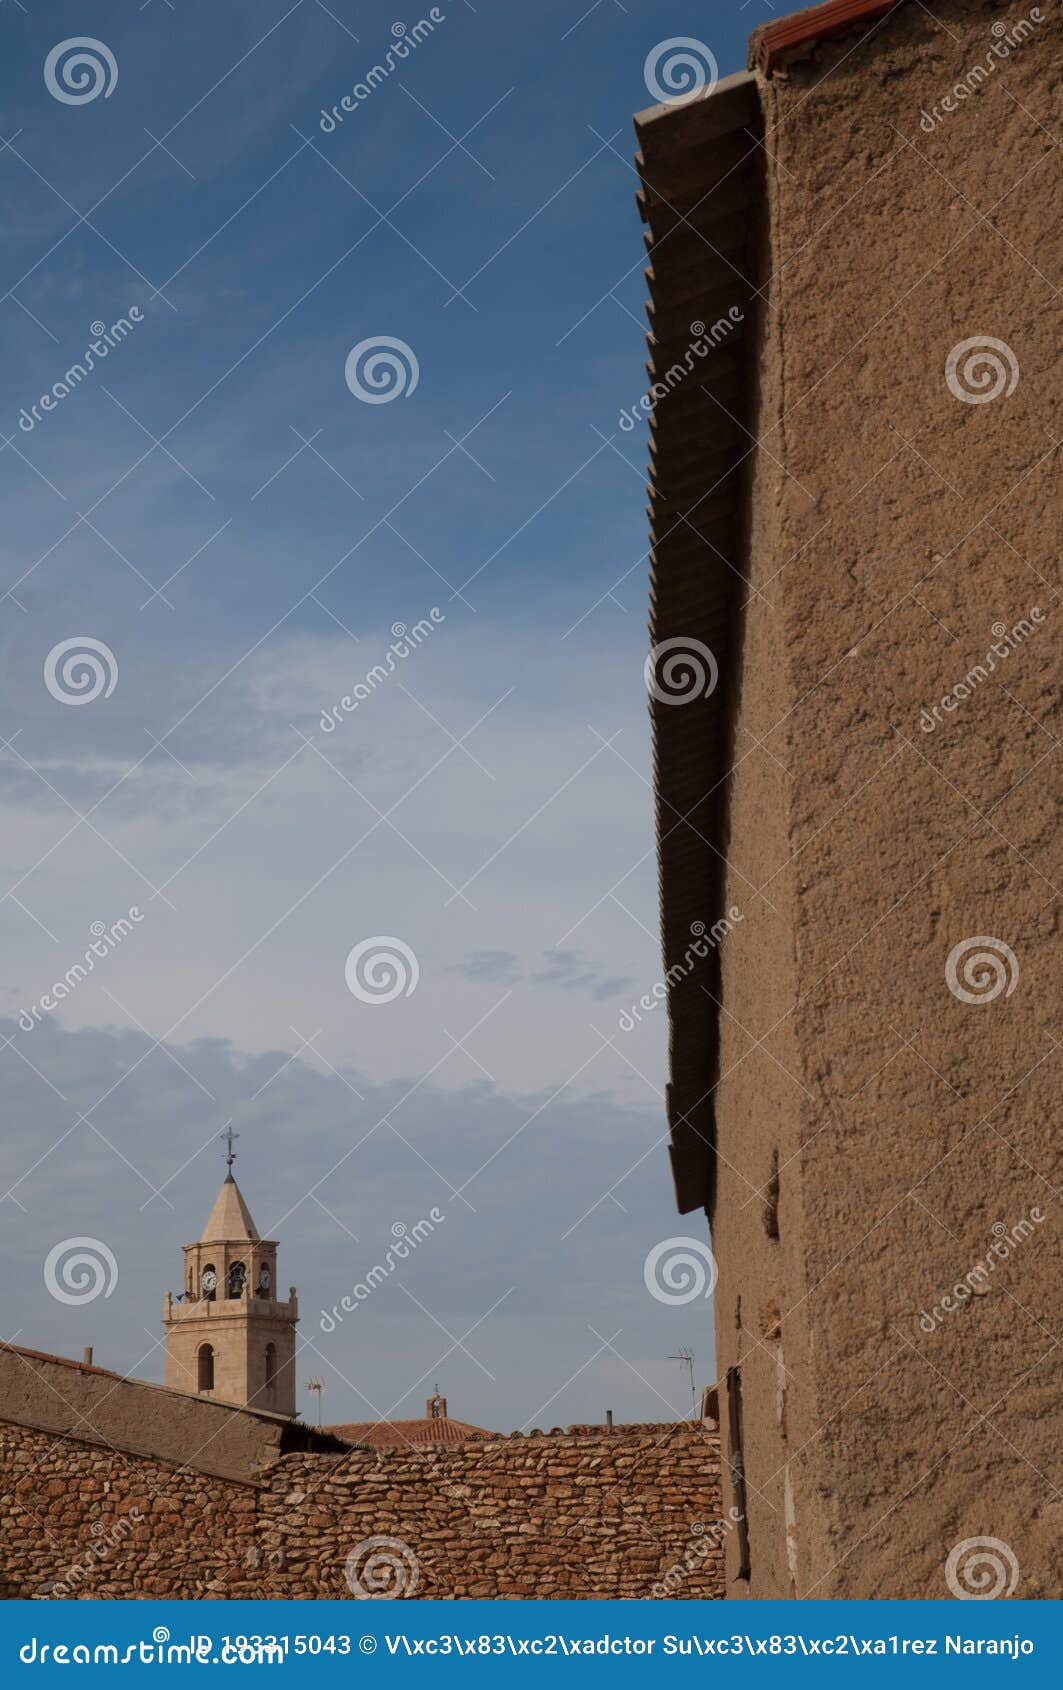 houses and tower of a church. bello.